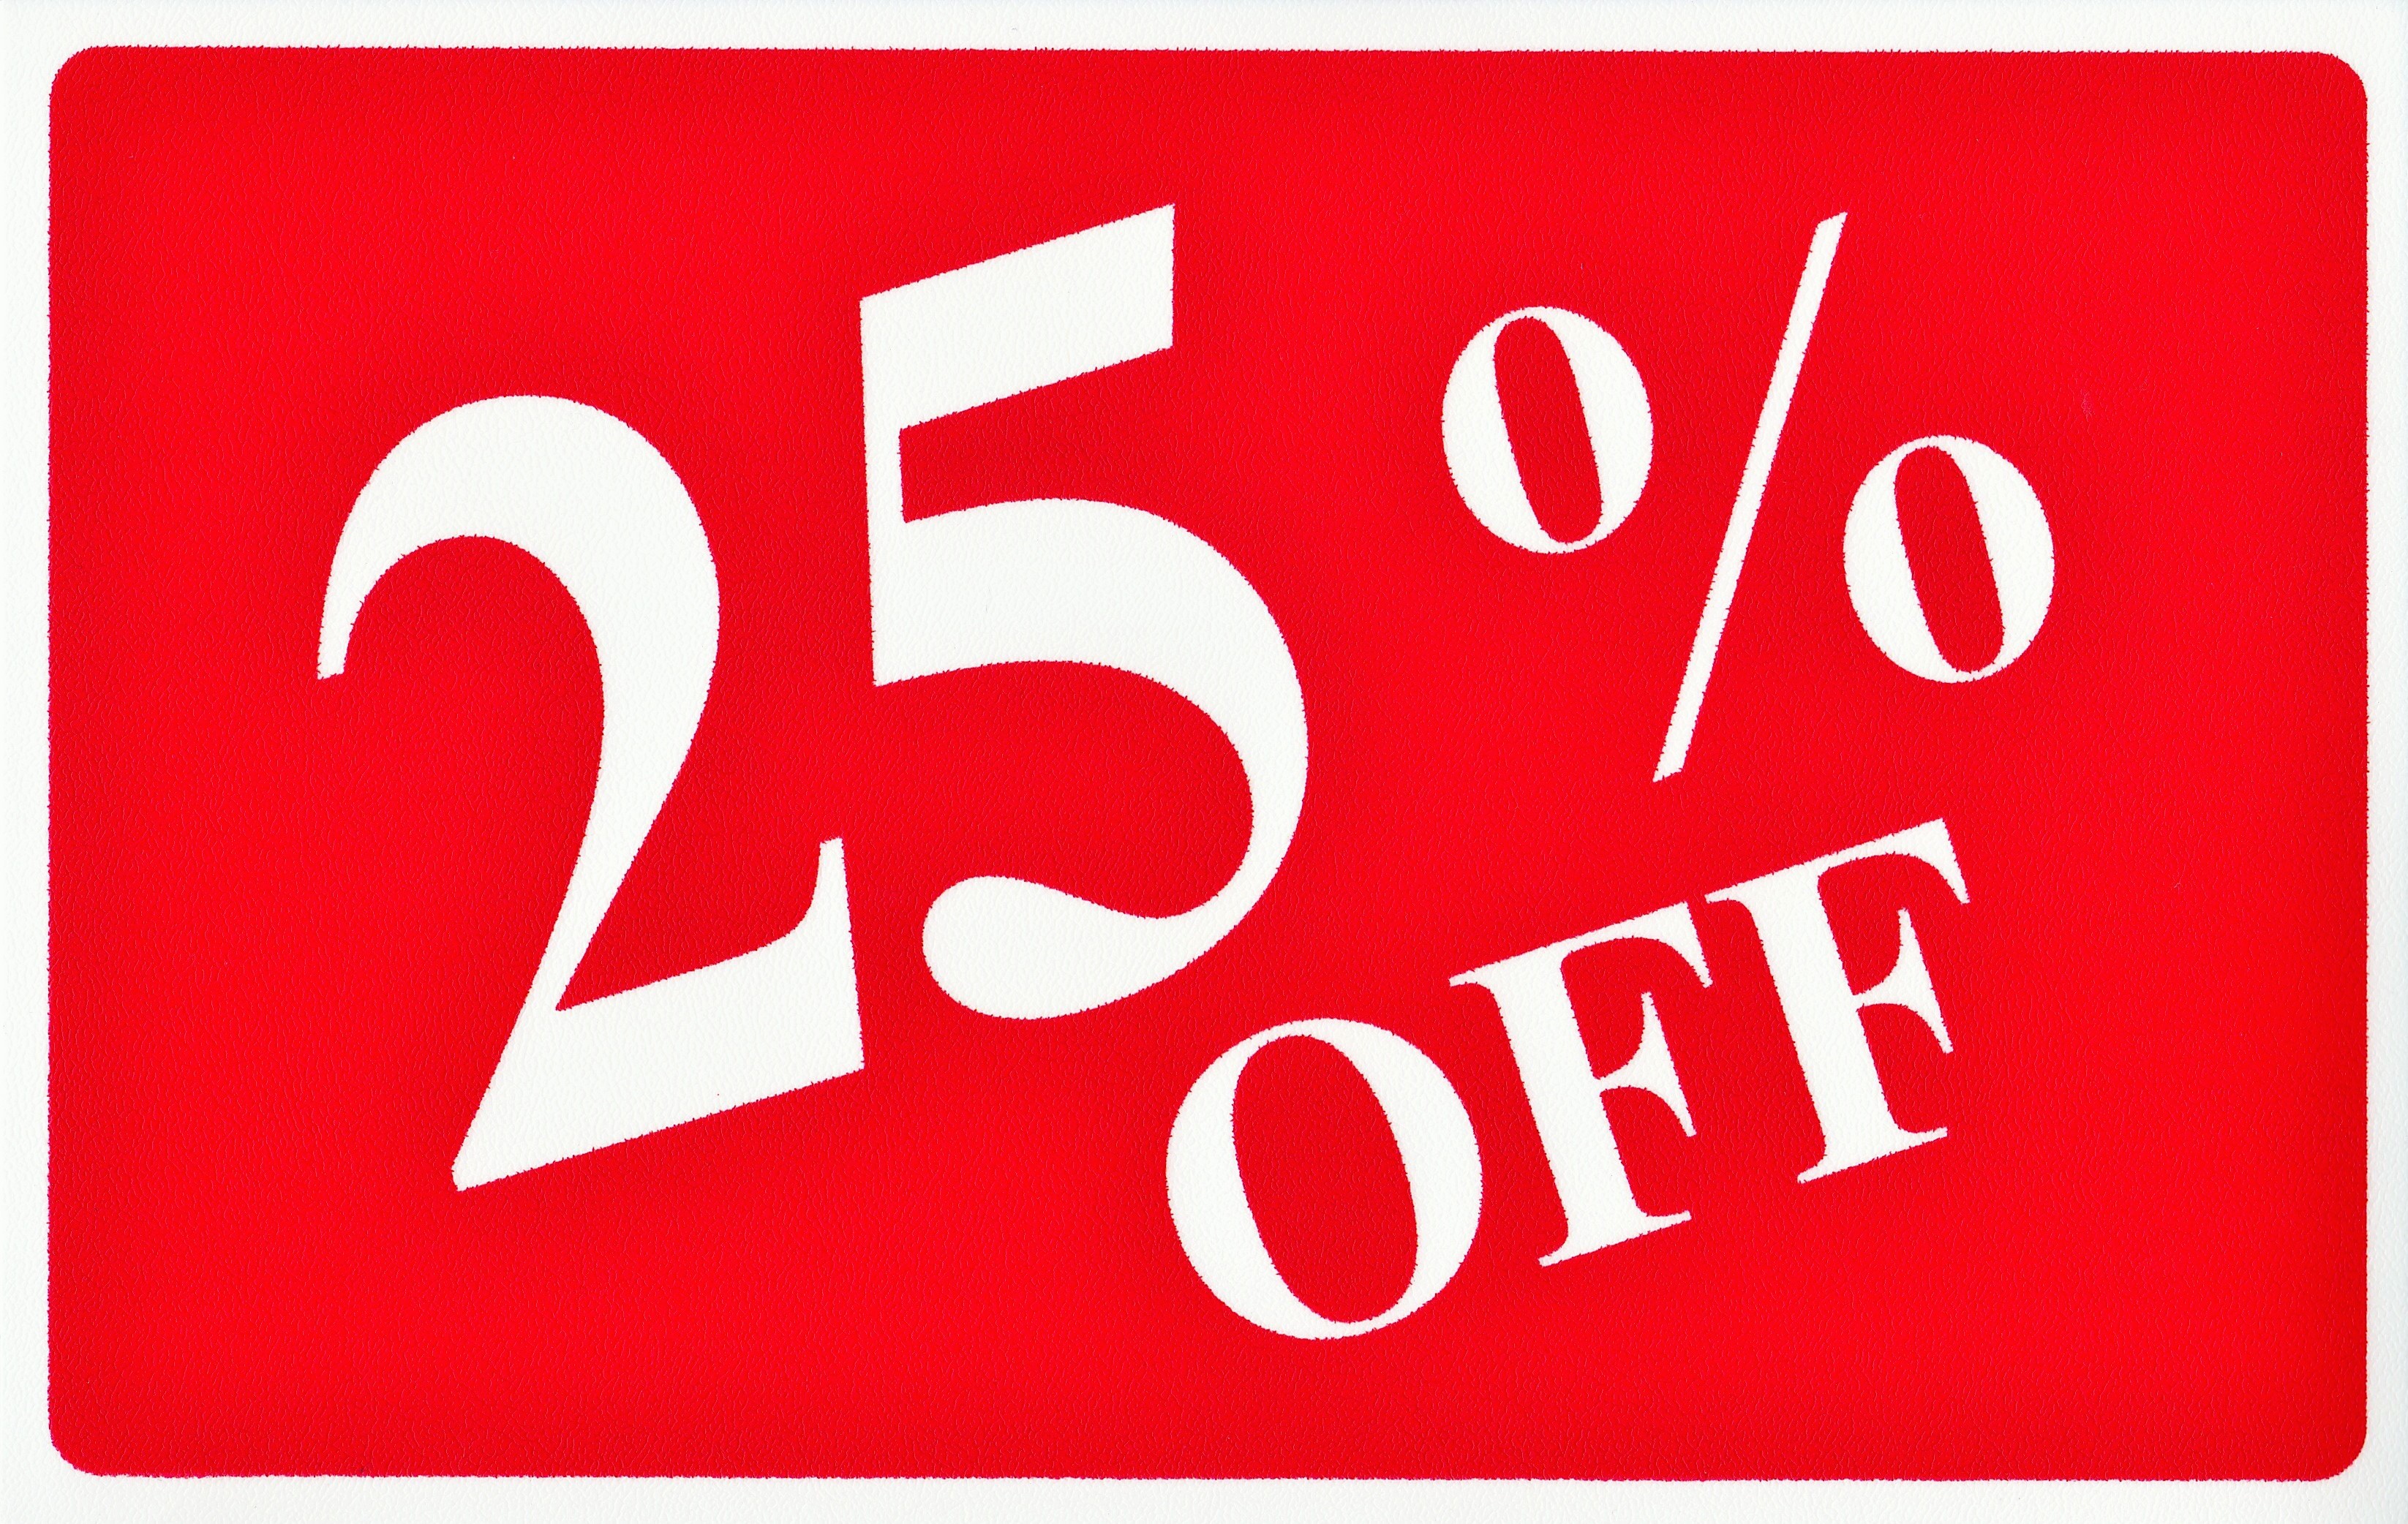 Pricing Sign: 25% OFF